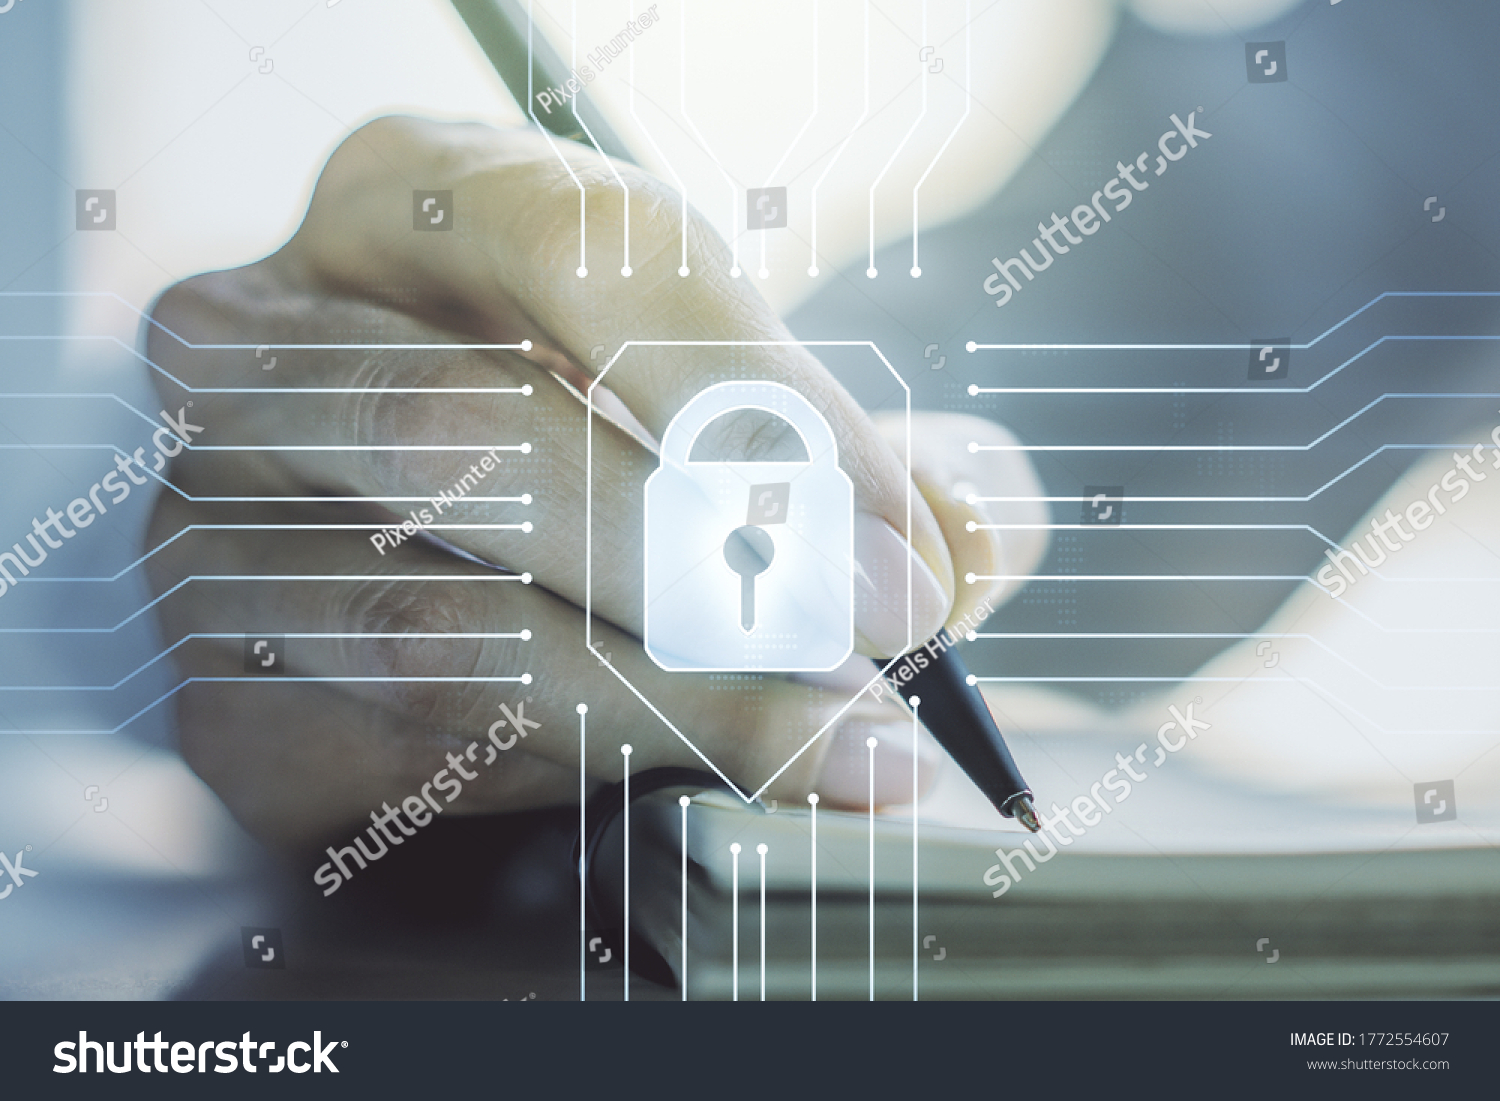 Creative lock illustration with microcircuit and woman hand writing in diary on background, cyber security concept. Multiexposure #1772554607